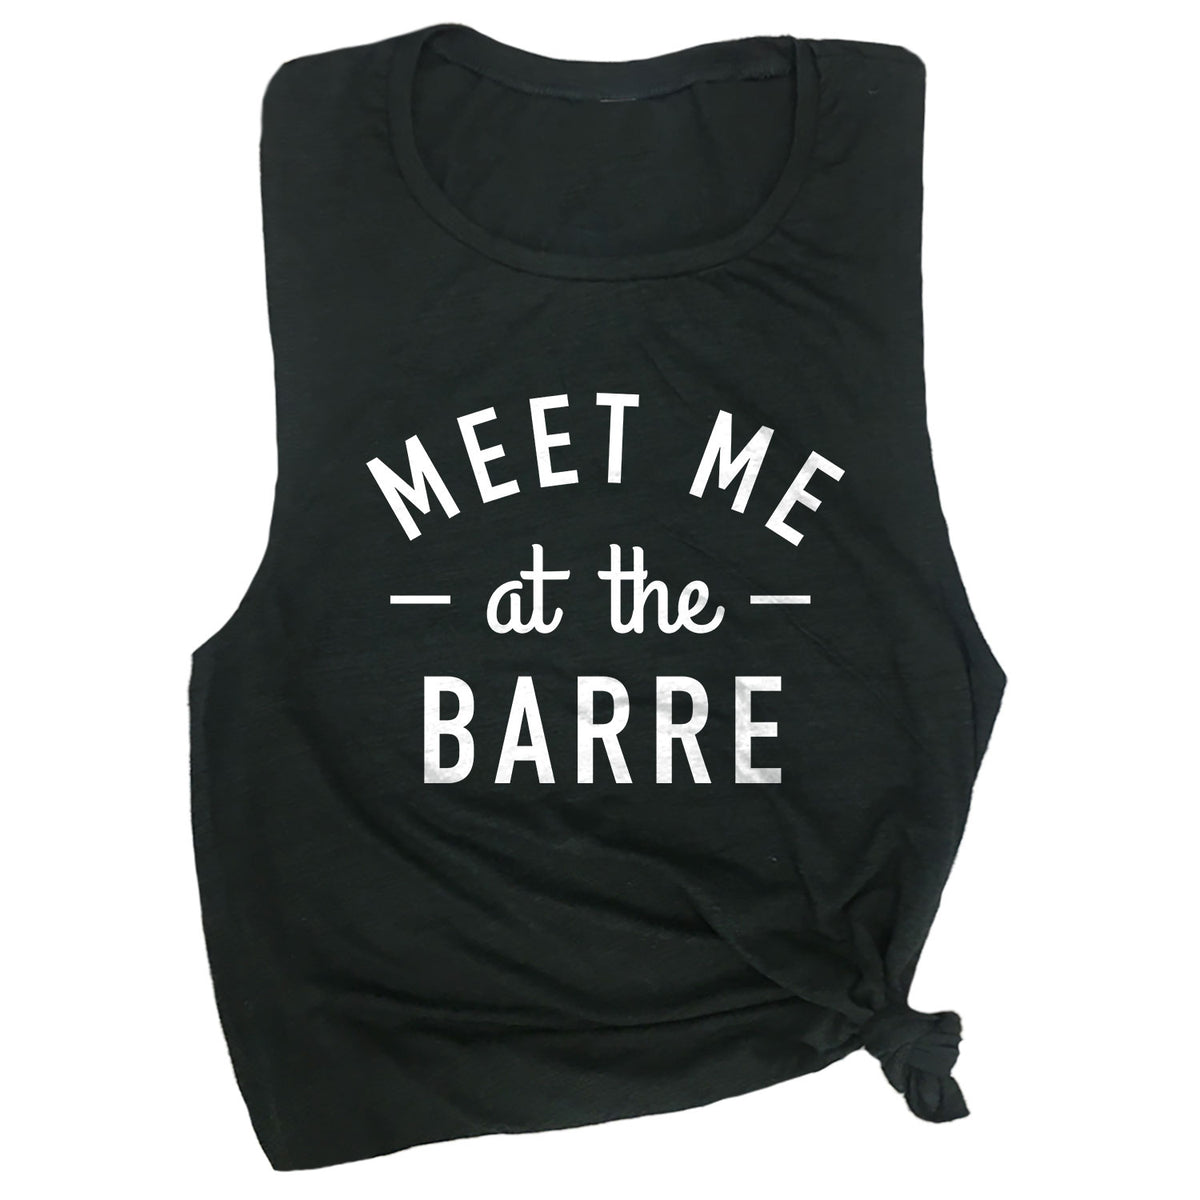 Meet Me at the Barre Muscle Tee